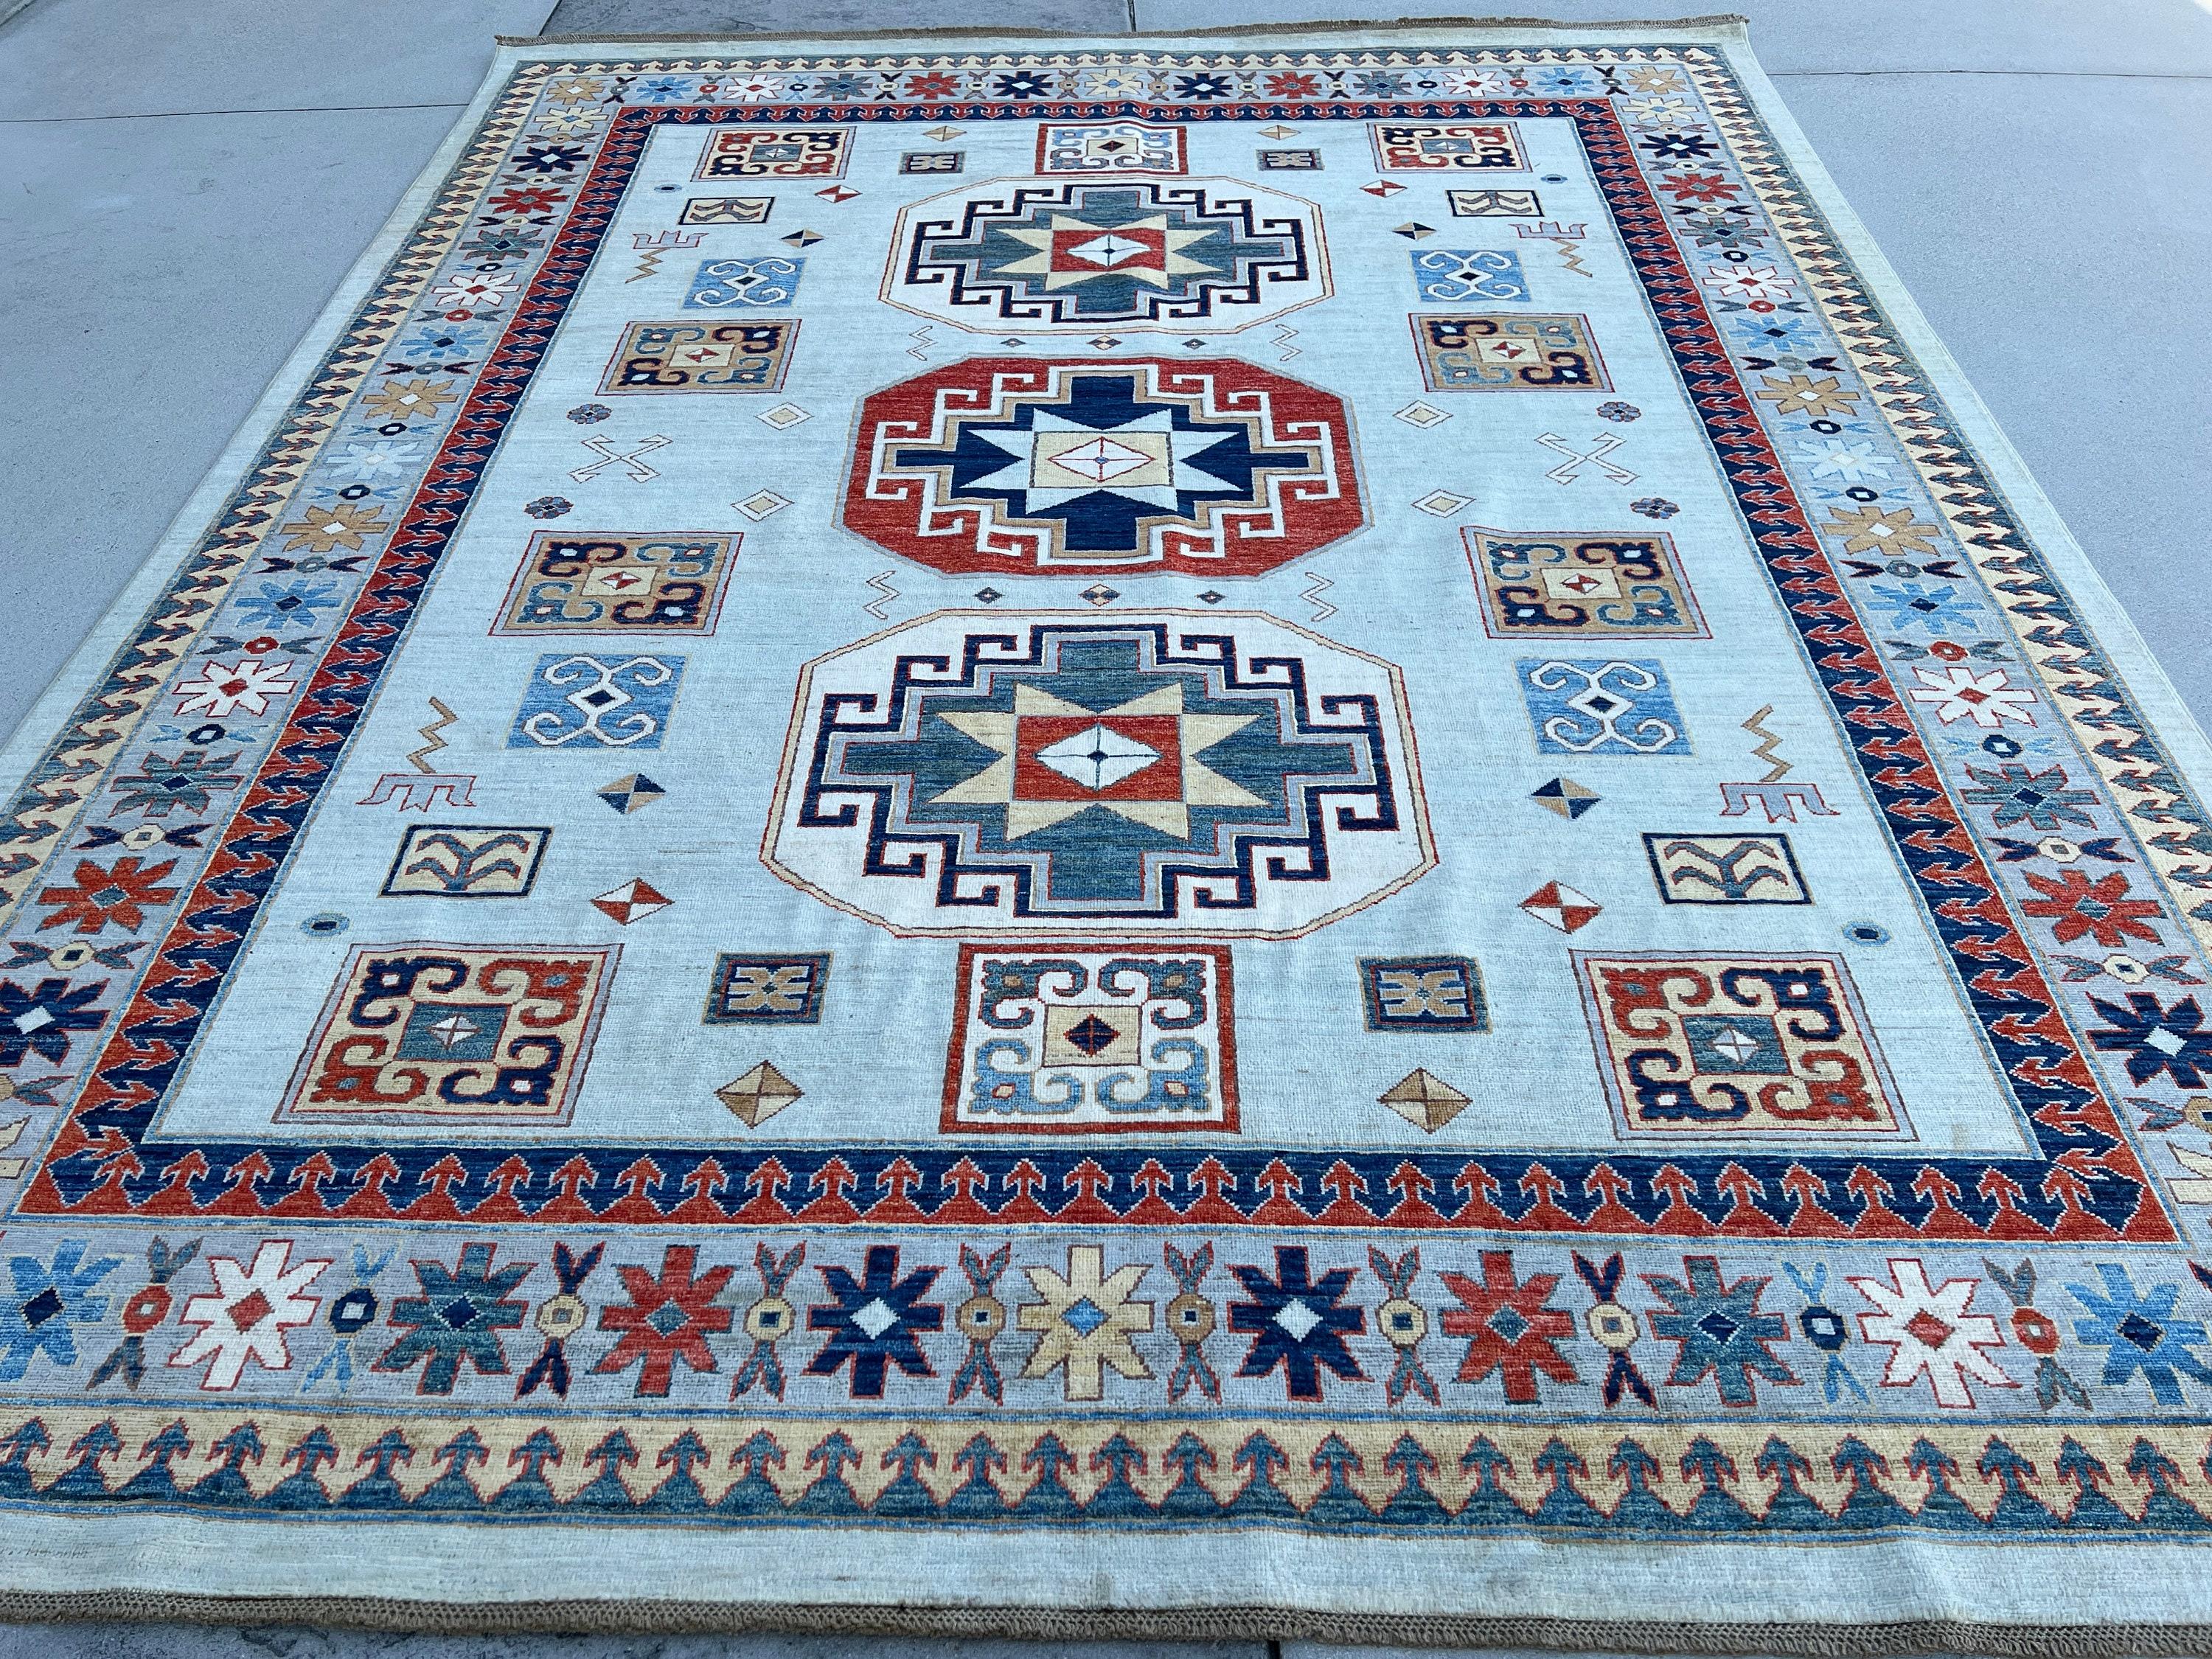 8x10 Hand-Knotted Afghan Rug Premium Hand-Spun Afghan Wool Fair Trade In New Condition For Sale In San Marcos, CA